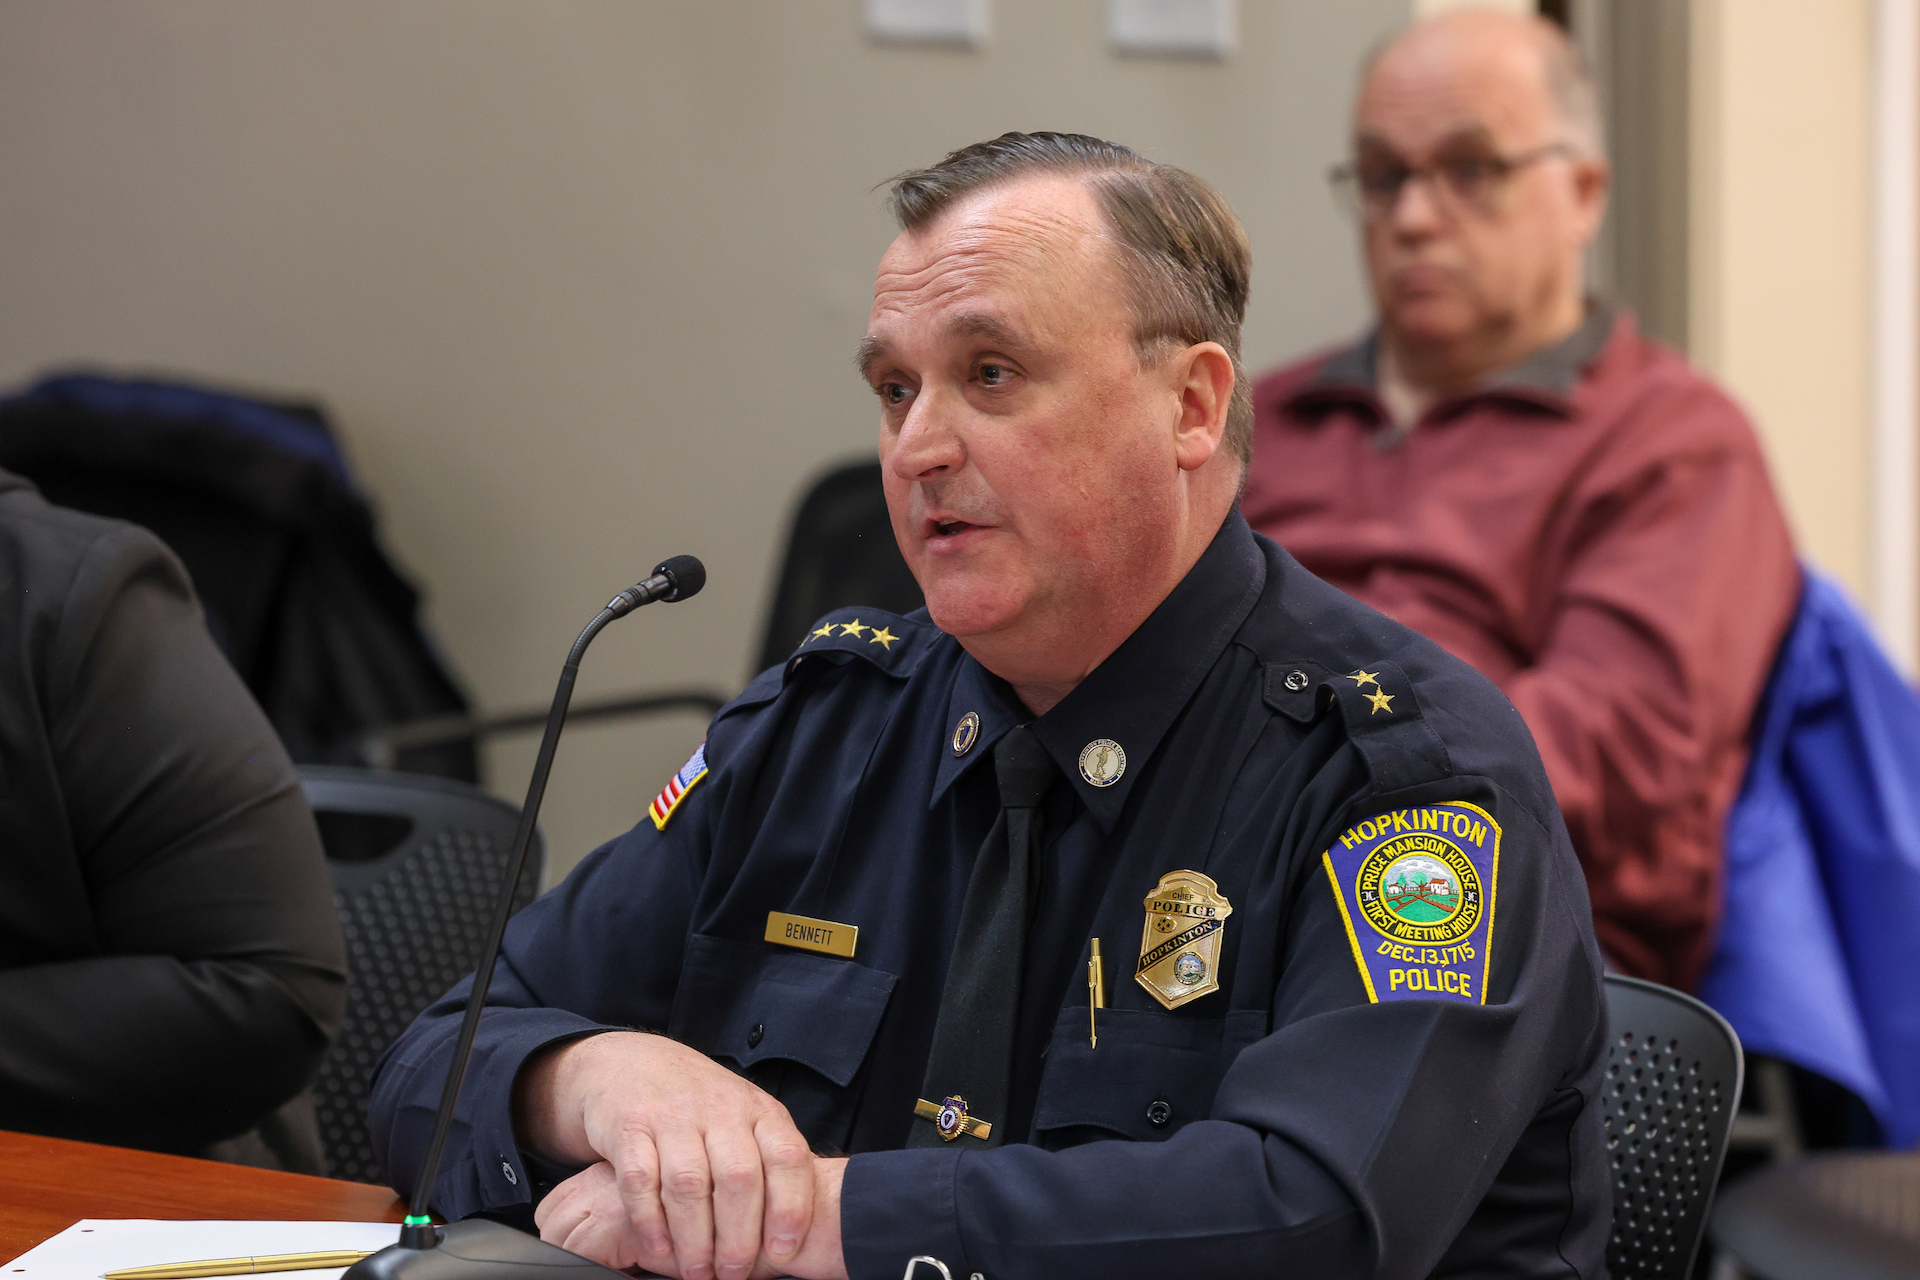 Select Board completes HPD Chief Bennett’s midyear review, offers goals for improvement